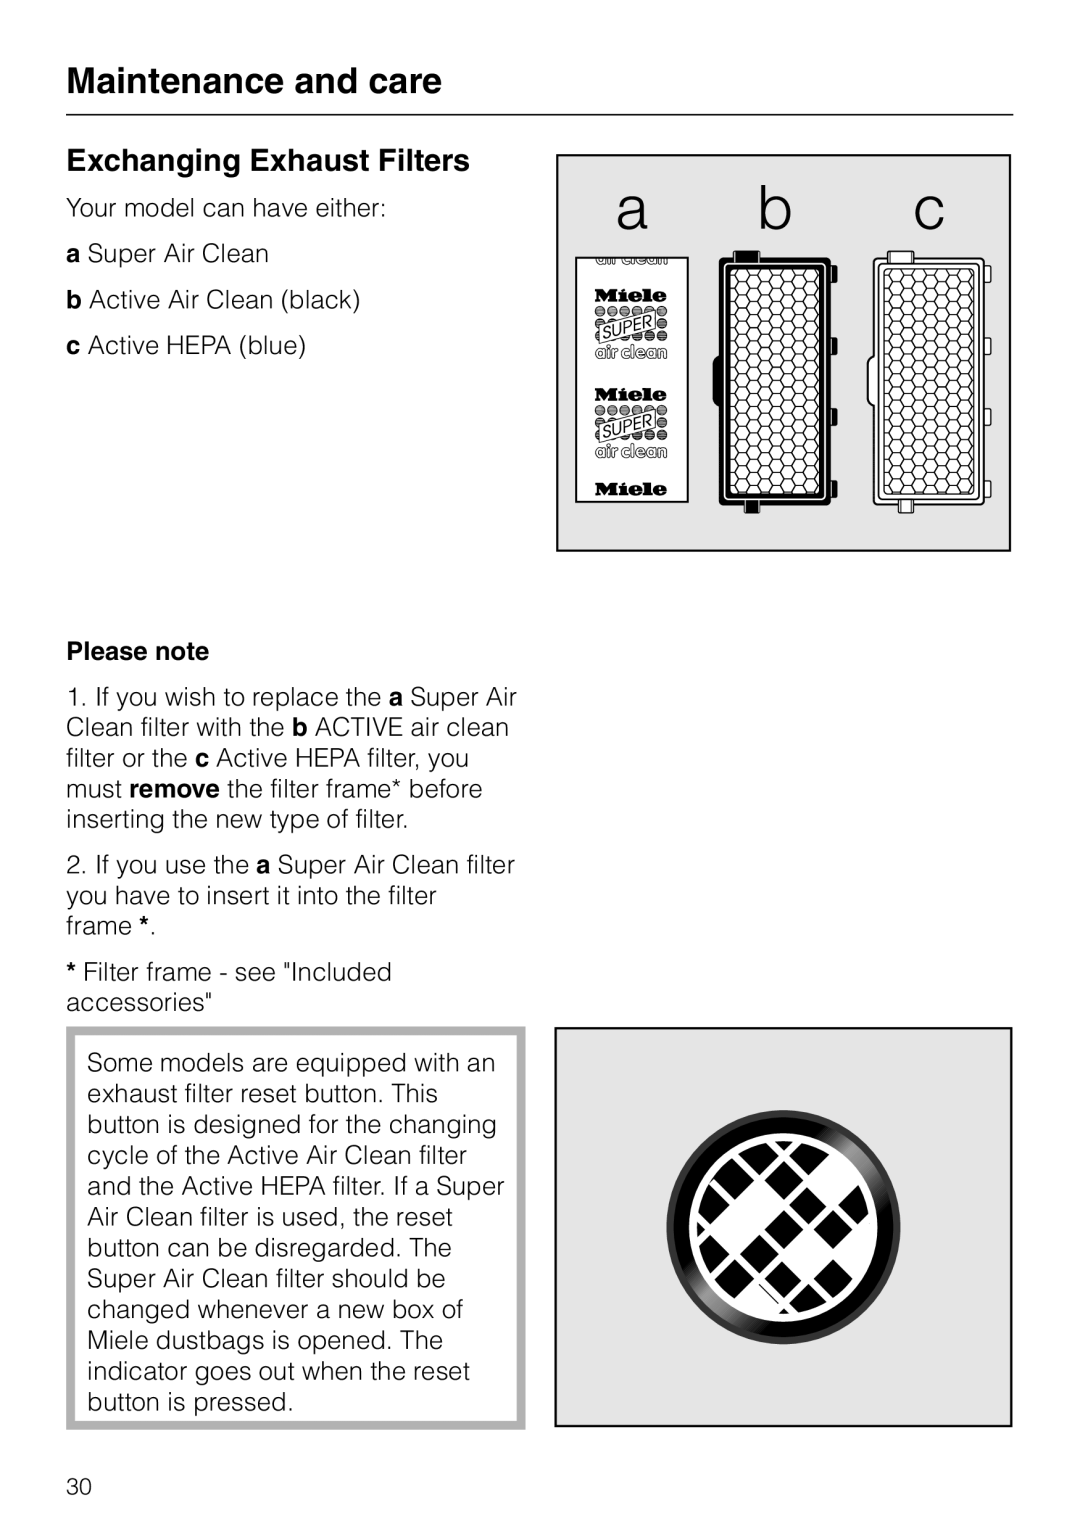 Miele S 5000 operating instructions Exchanging Exhaust Filters, Maintenance and care, Please note 